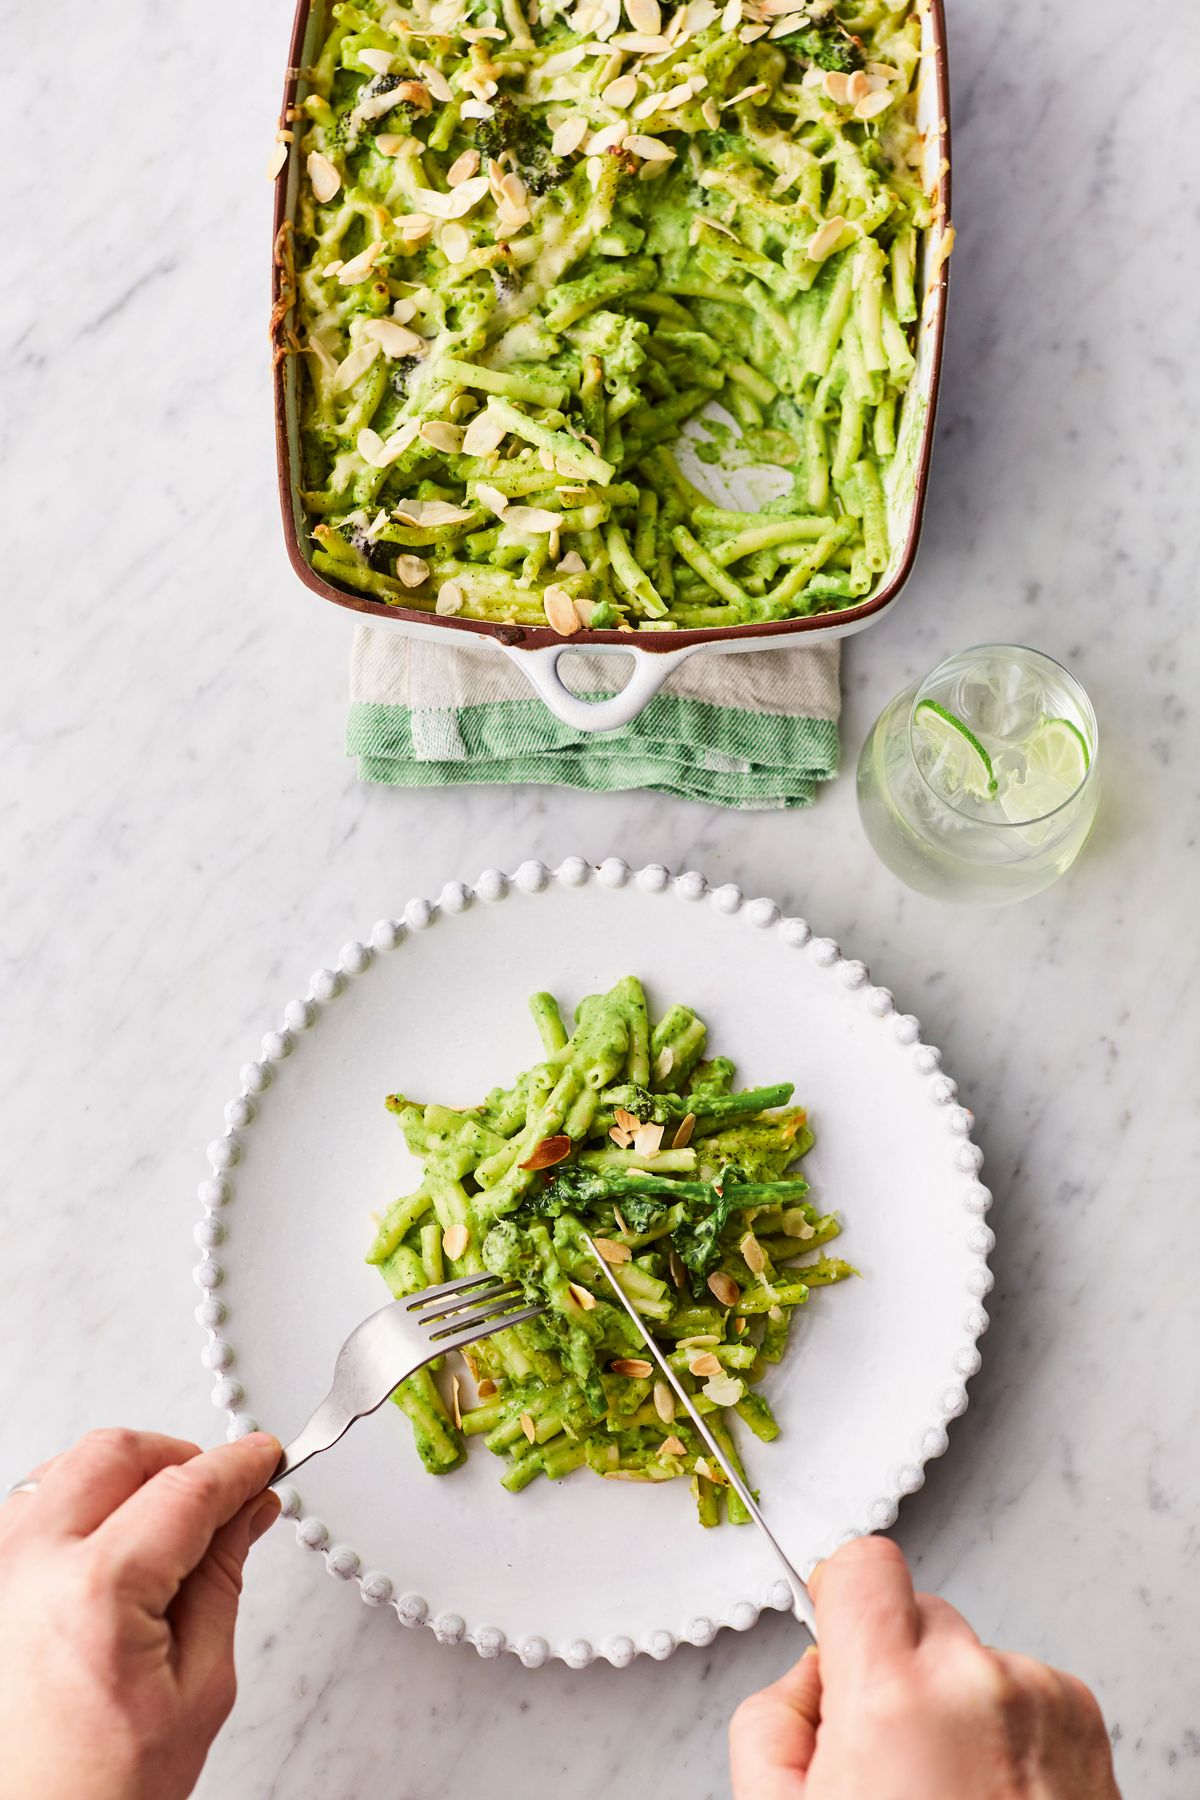 Jamie Oliver’s Greens Mac’n’Cheese with Leek, Broccoli, Spinach and Toasted Almond Topping